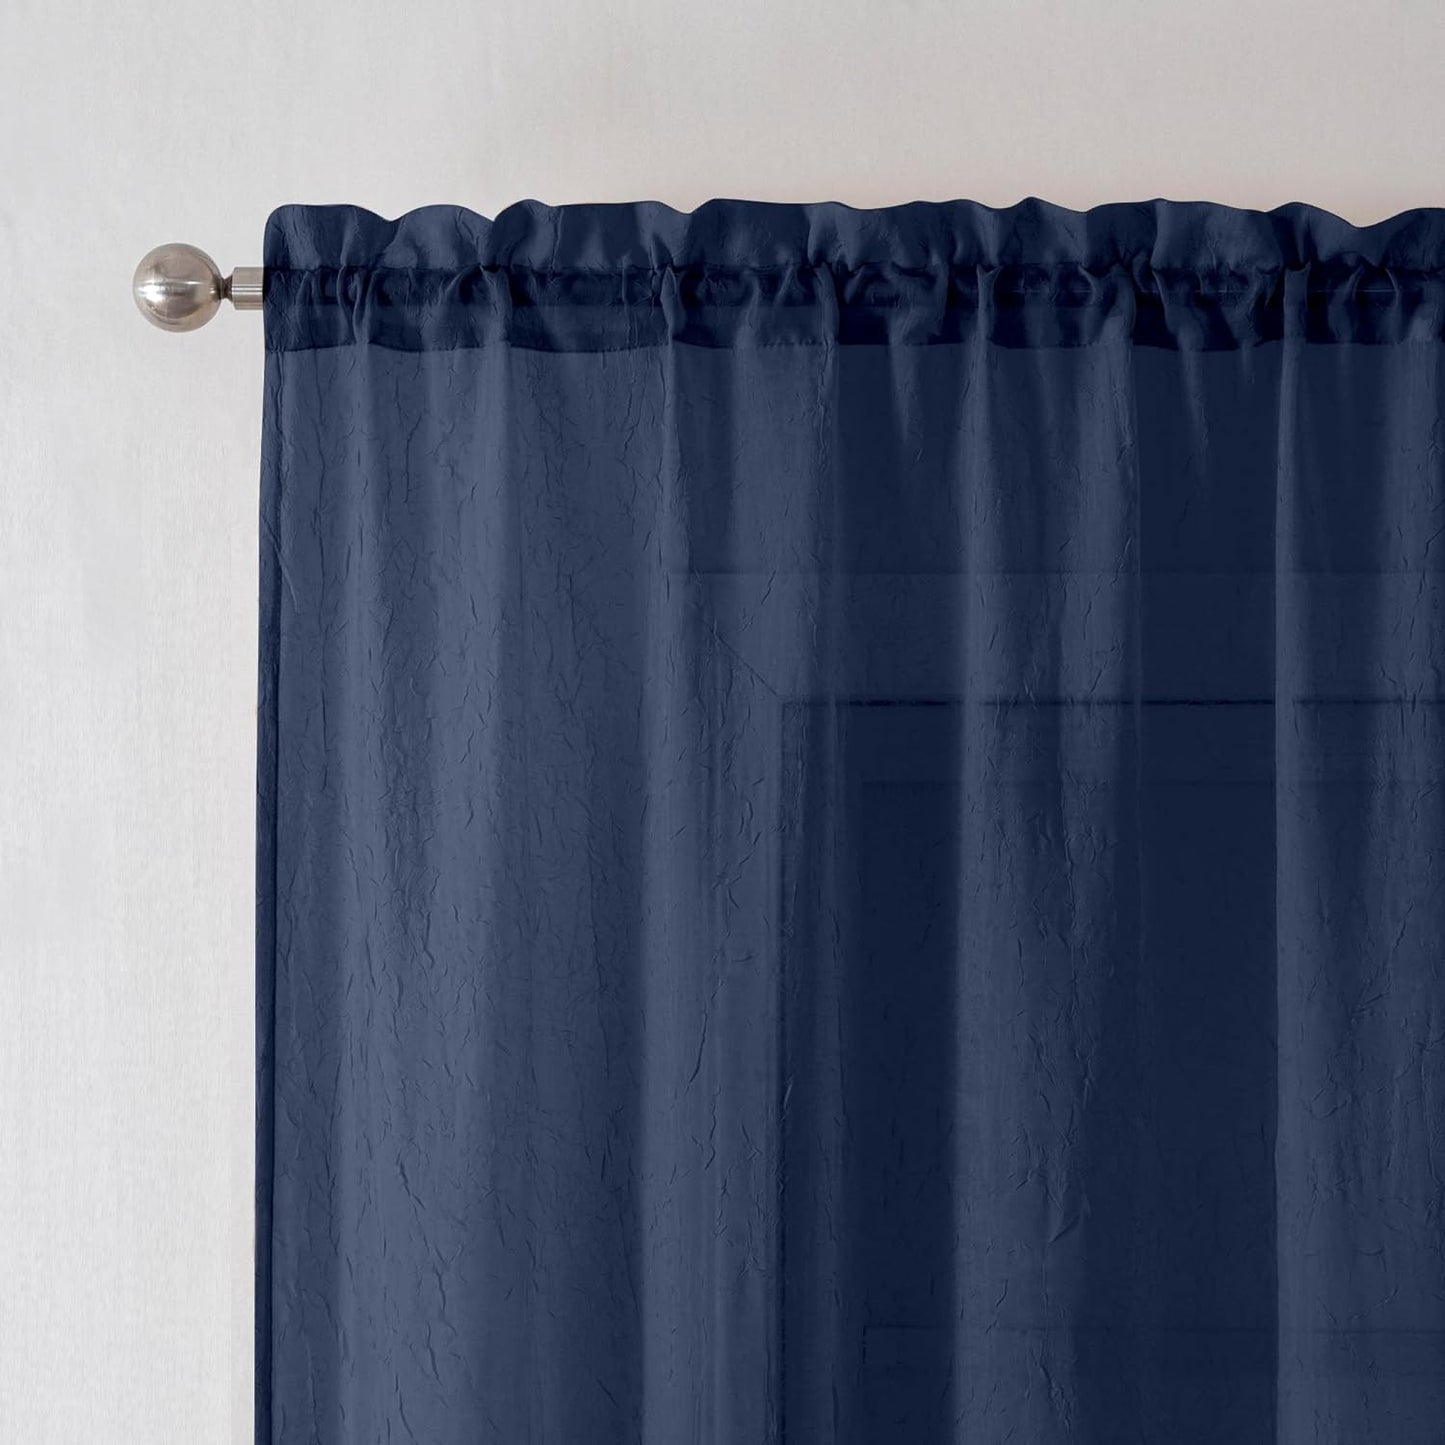 Crushed Sheer White Curtains 63 Inch Length 2 Panels, Light Filtering Solid Crinkle Voile Short Sheer Curtian for Bedroom Living Room, Each 42Wx63L Inches  Chyhomenyc Navy Blue 42 W X 36 L 